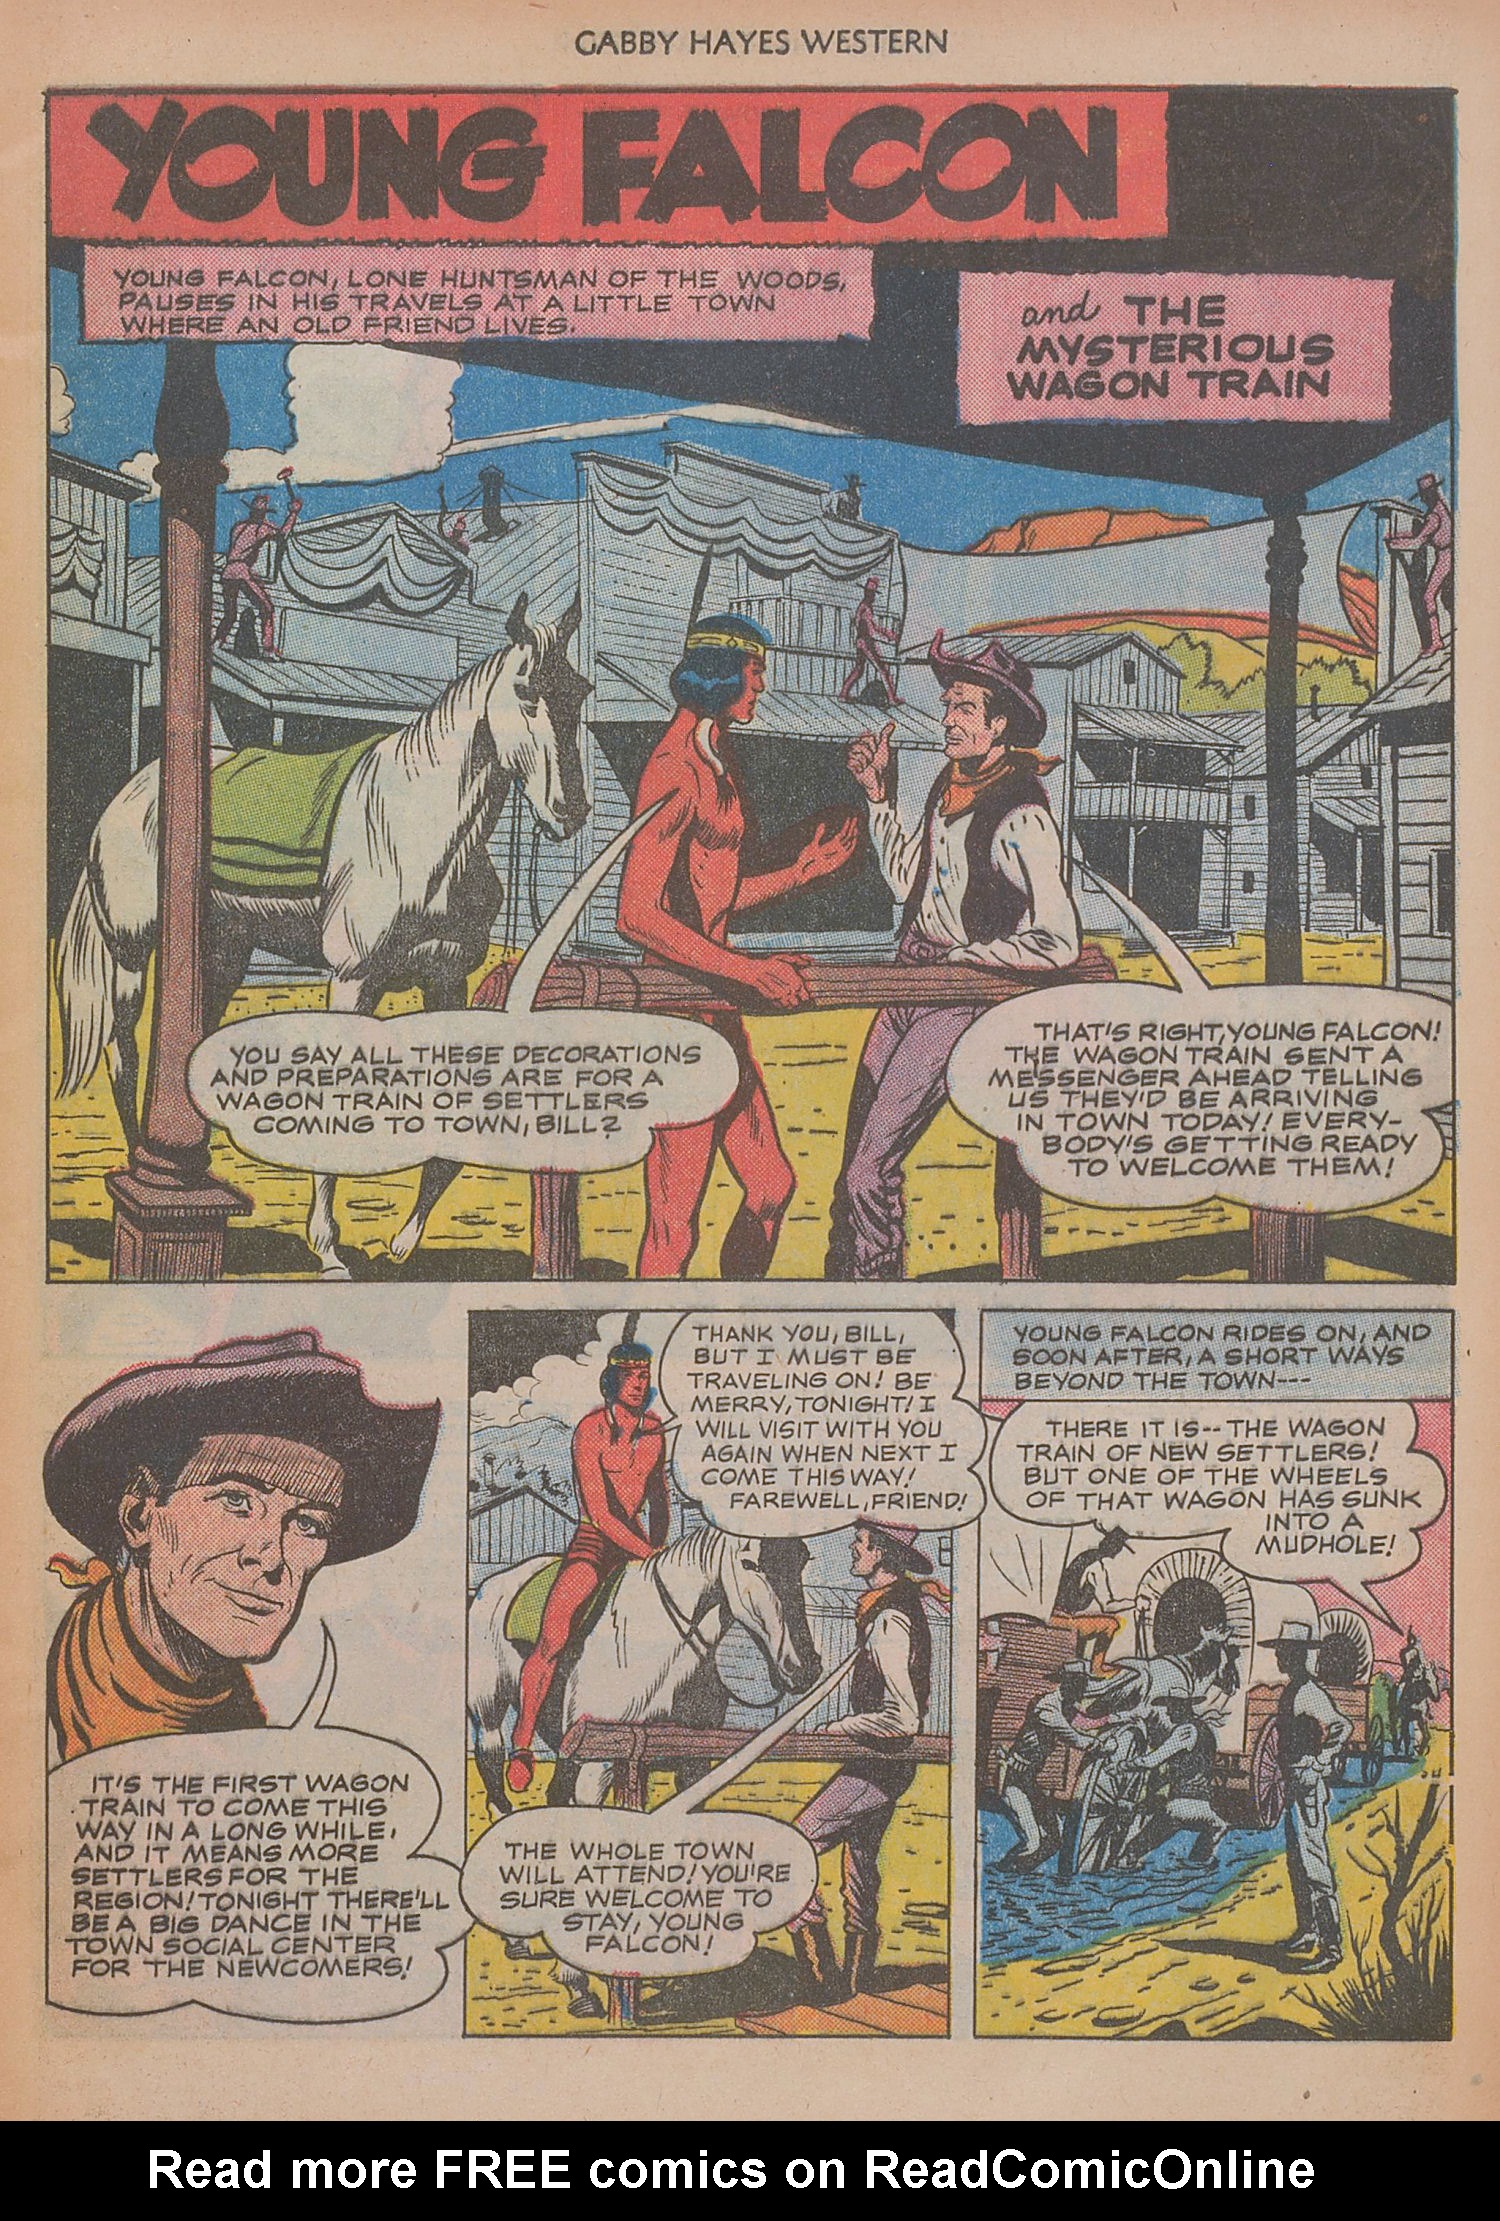 Read online Gabby Hayes Western comic -  Issue #22 - 13